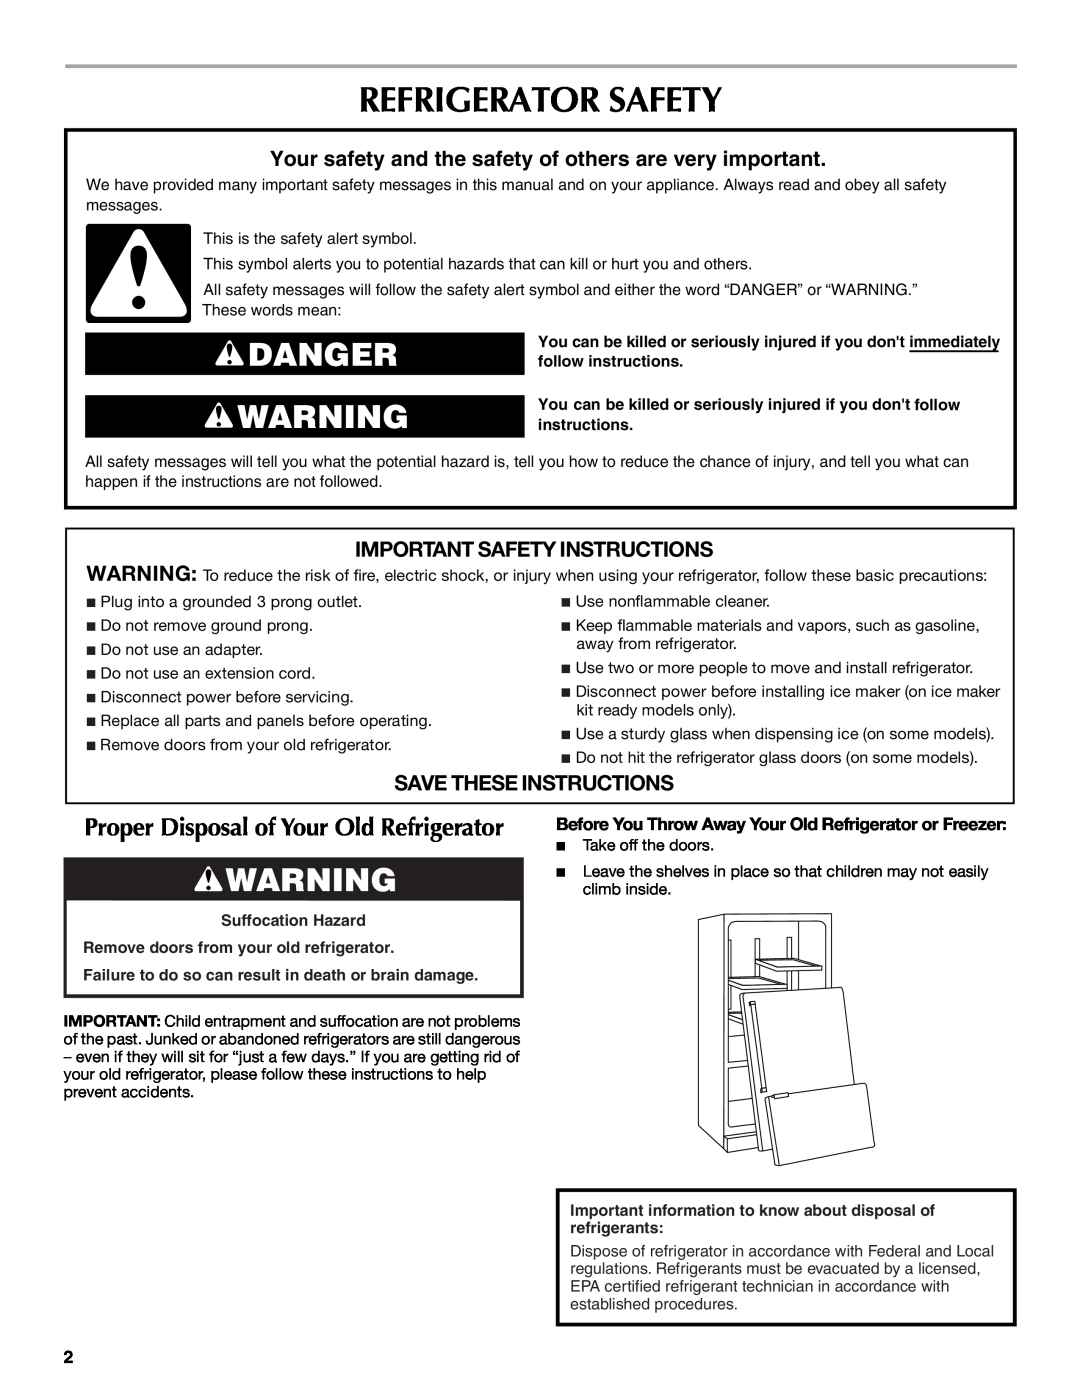 Maytag W10400978A Refrigerator Safety, Danger, Proper Disposal of Your Old Refrigerator, Important Safety Instructions 